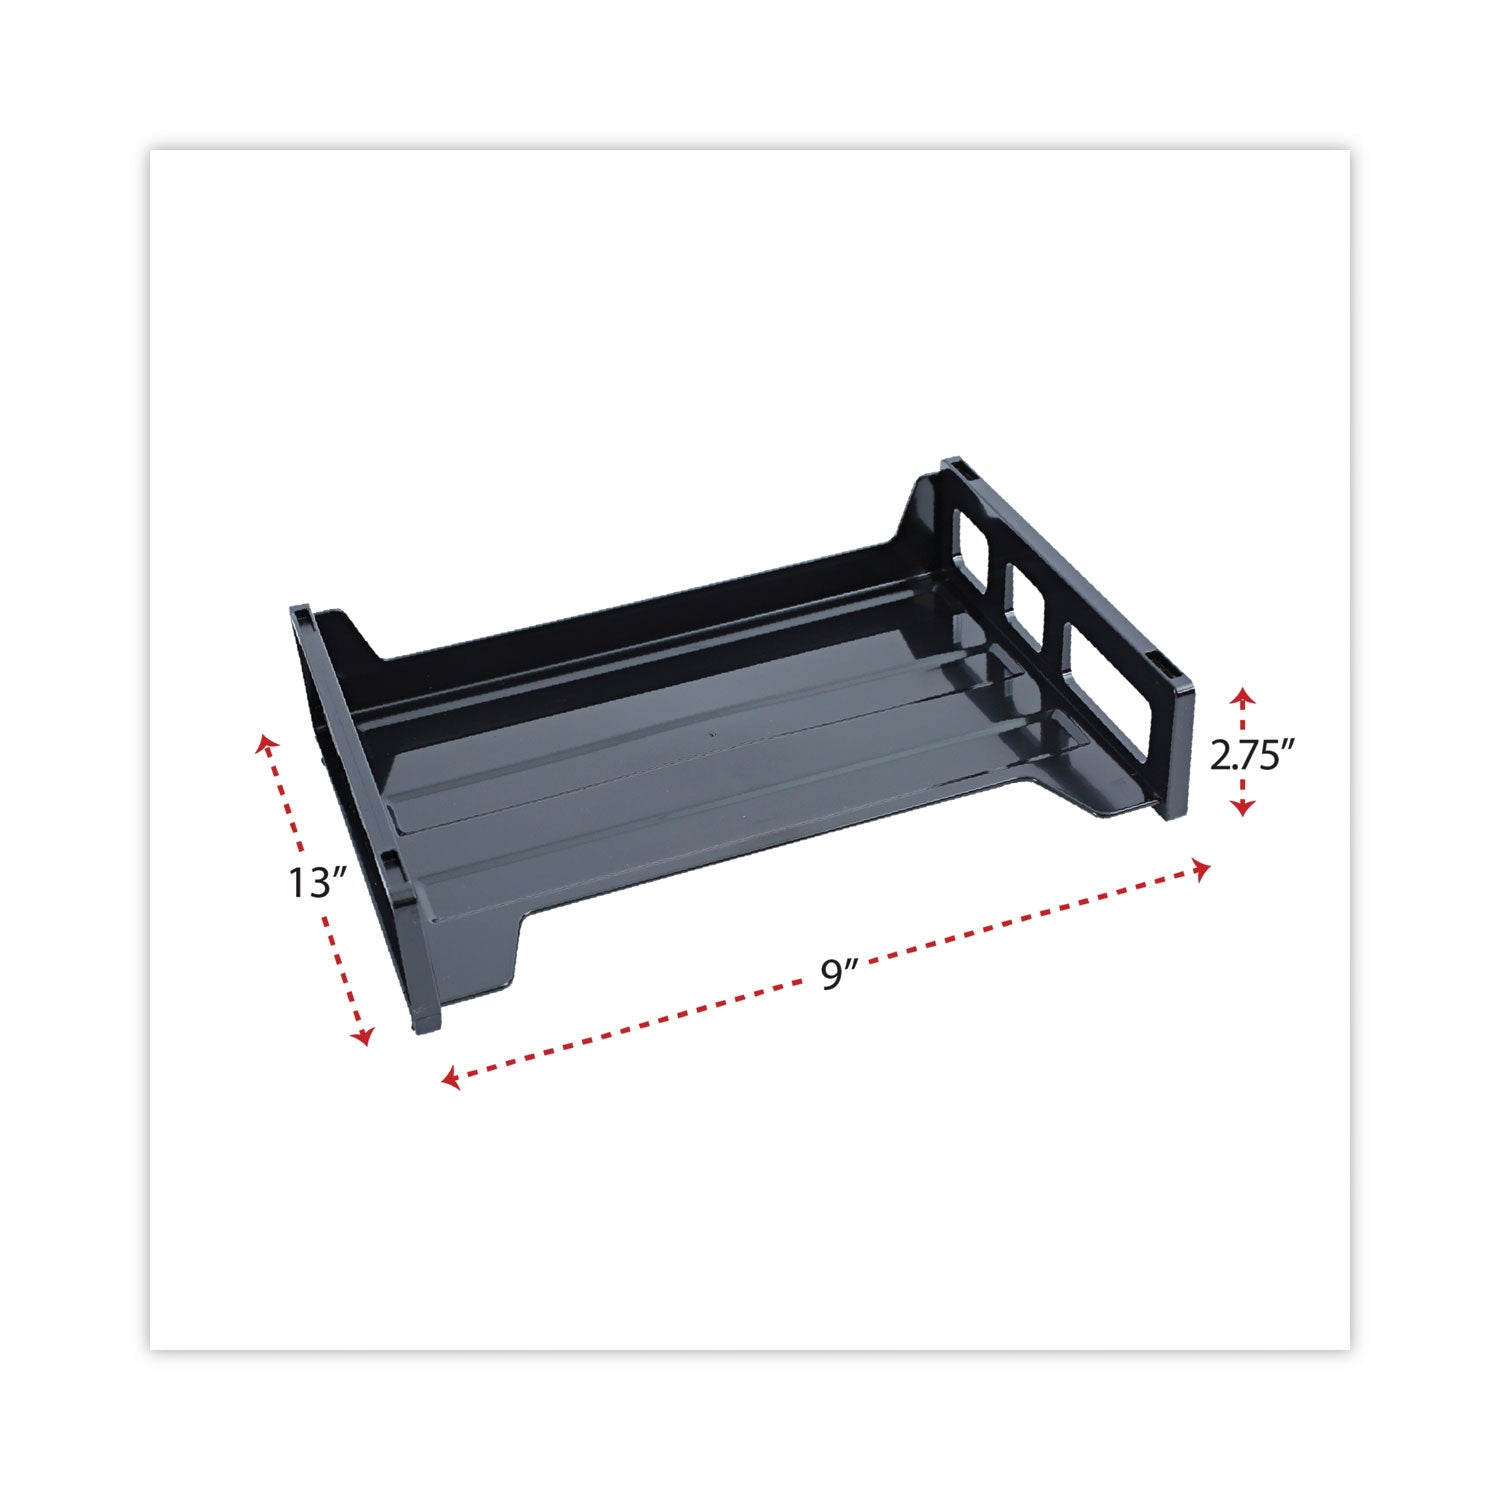 Recycled Plastic Side Load Desk Trays, 2 Sections, Letter Size Files, 13" x 9" x 2.75", Black - 